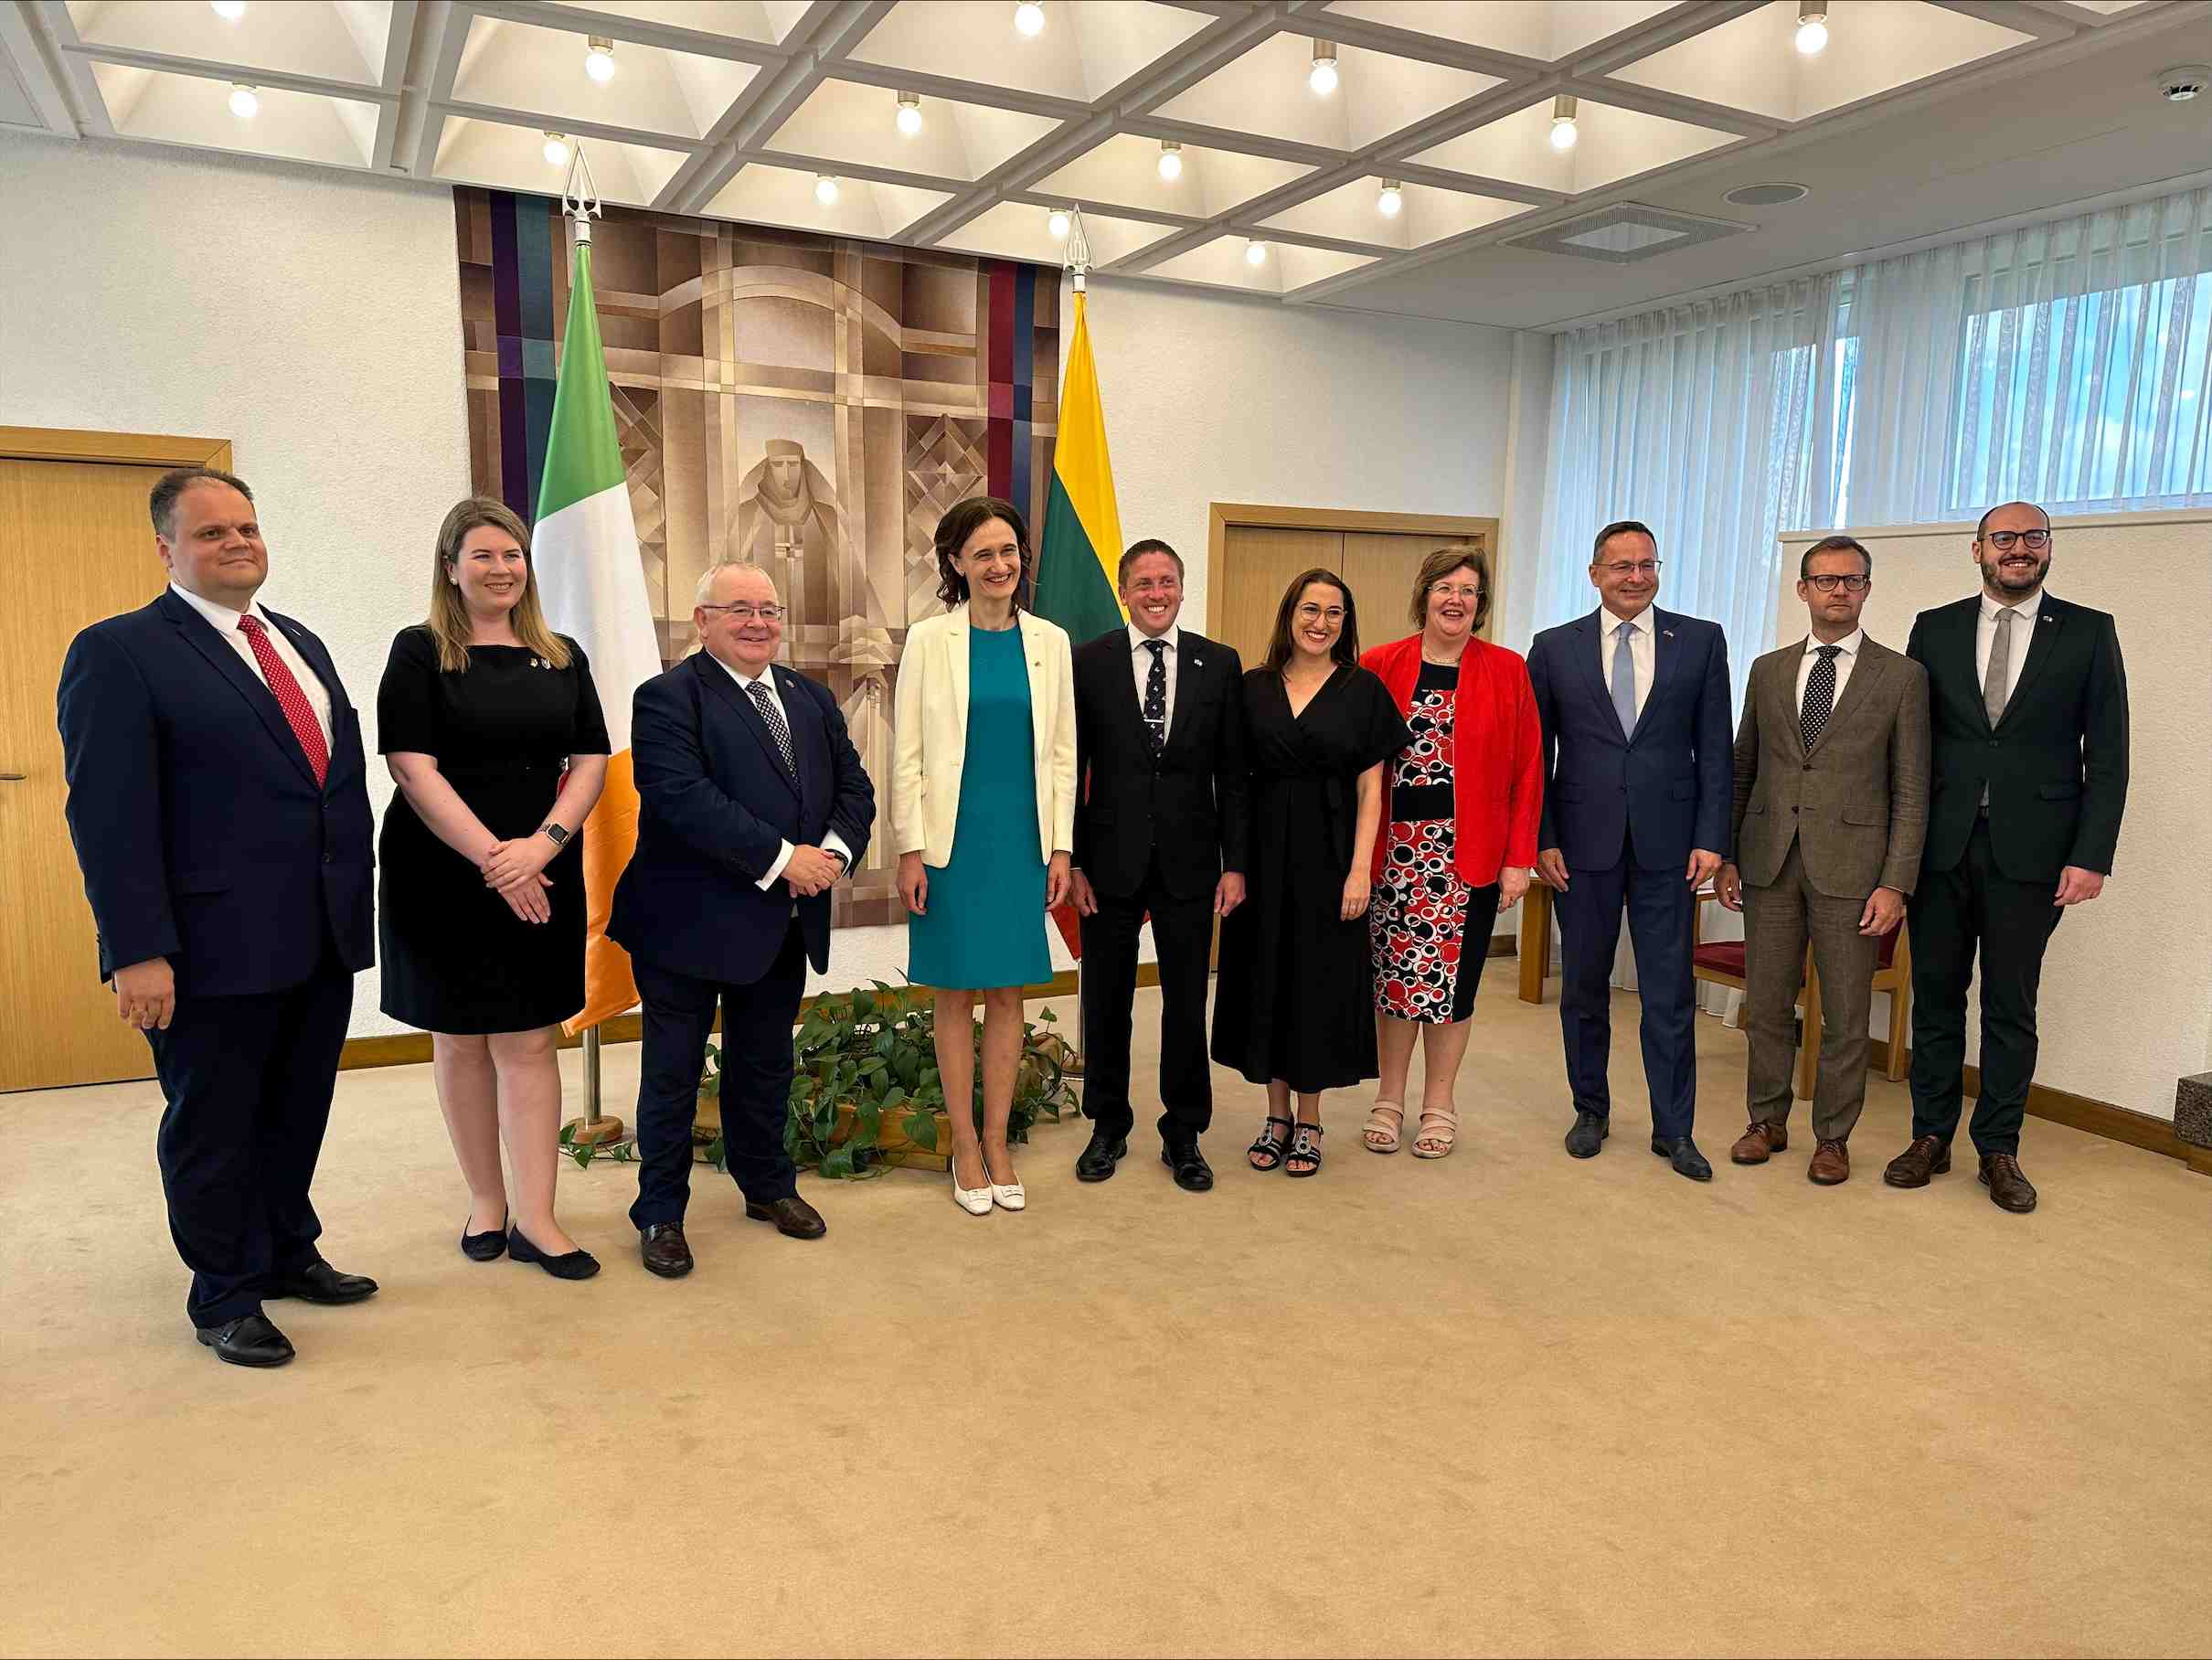 Irish parliamentary delegation on an official visit to Lithuania